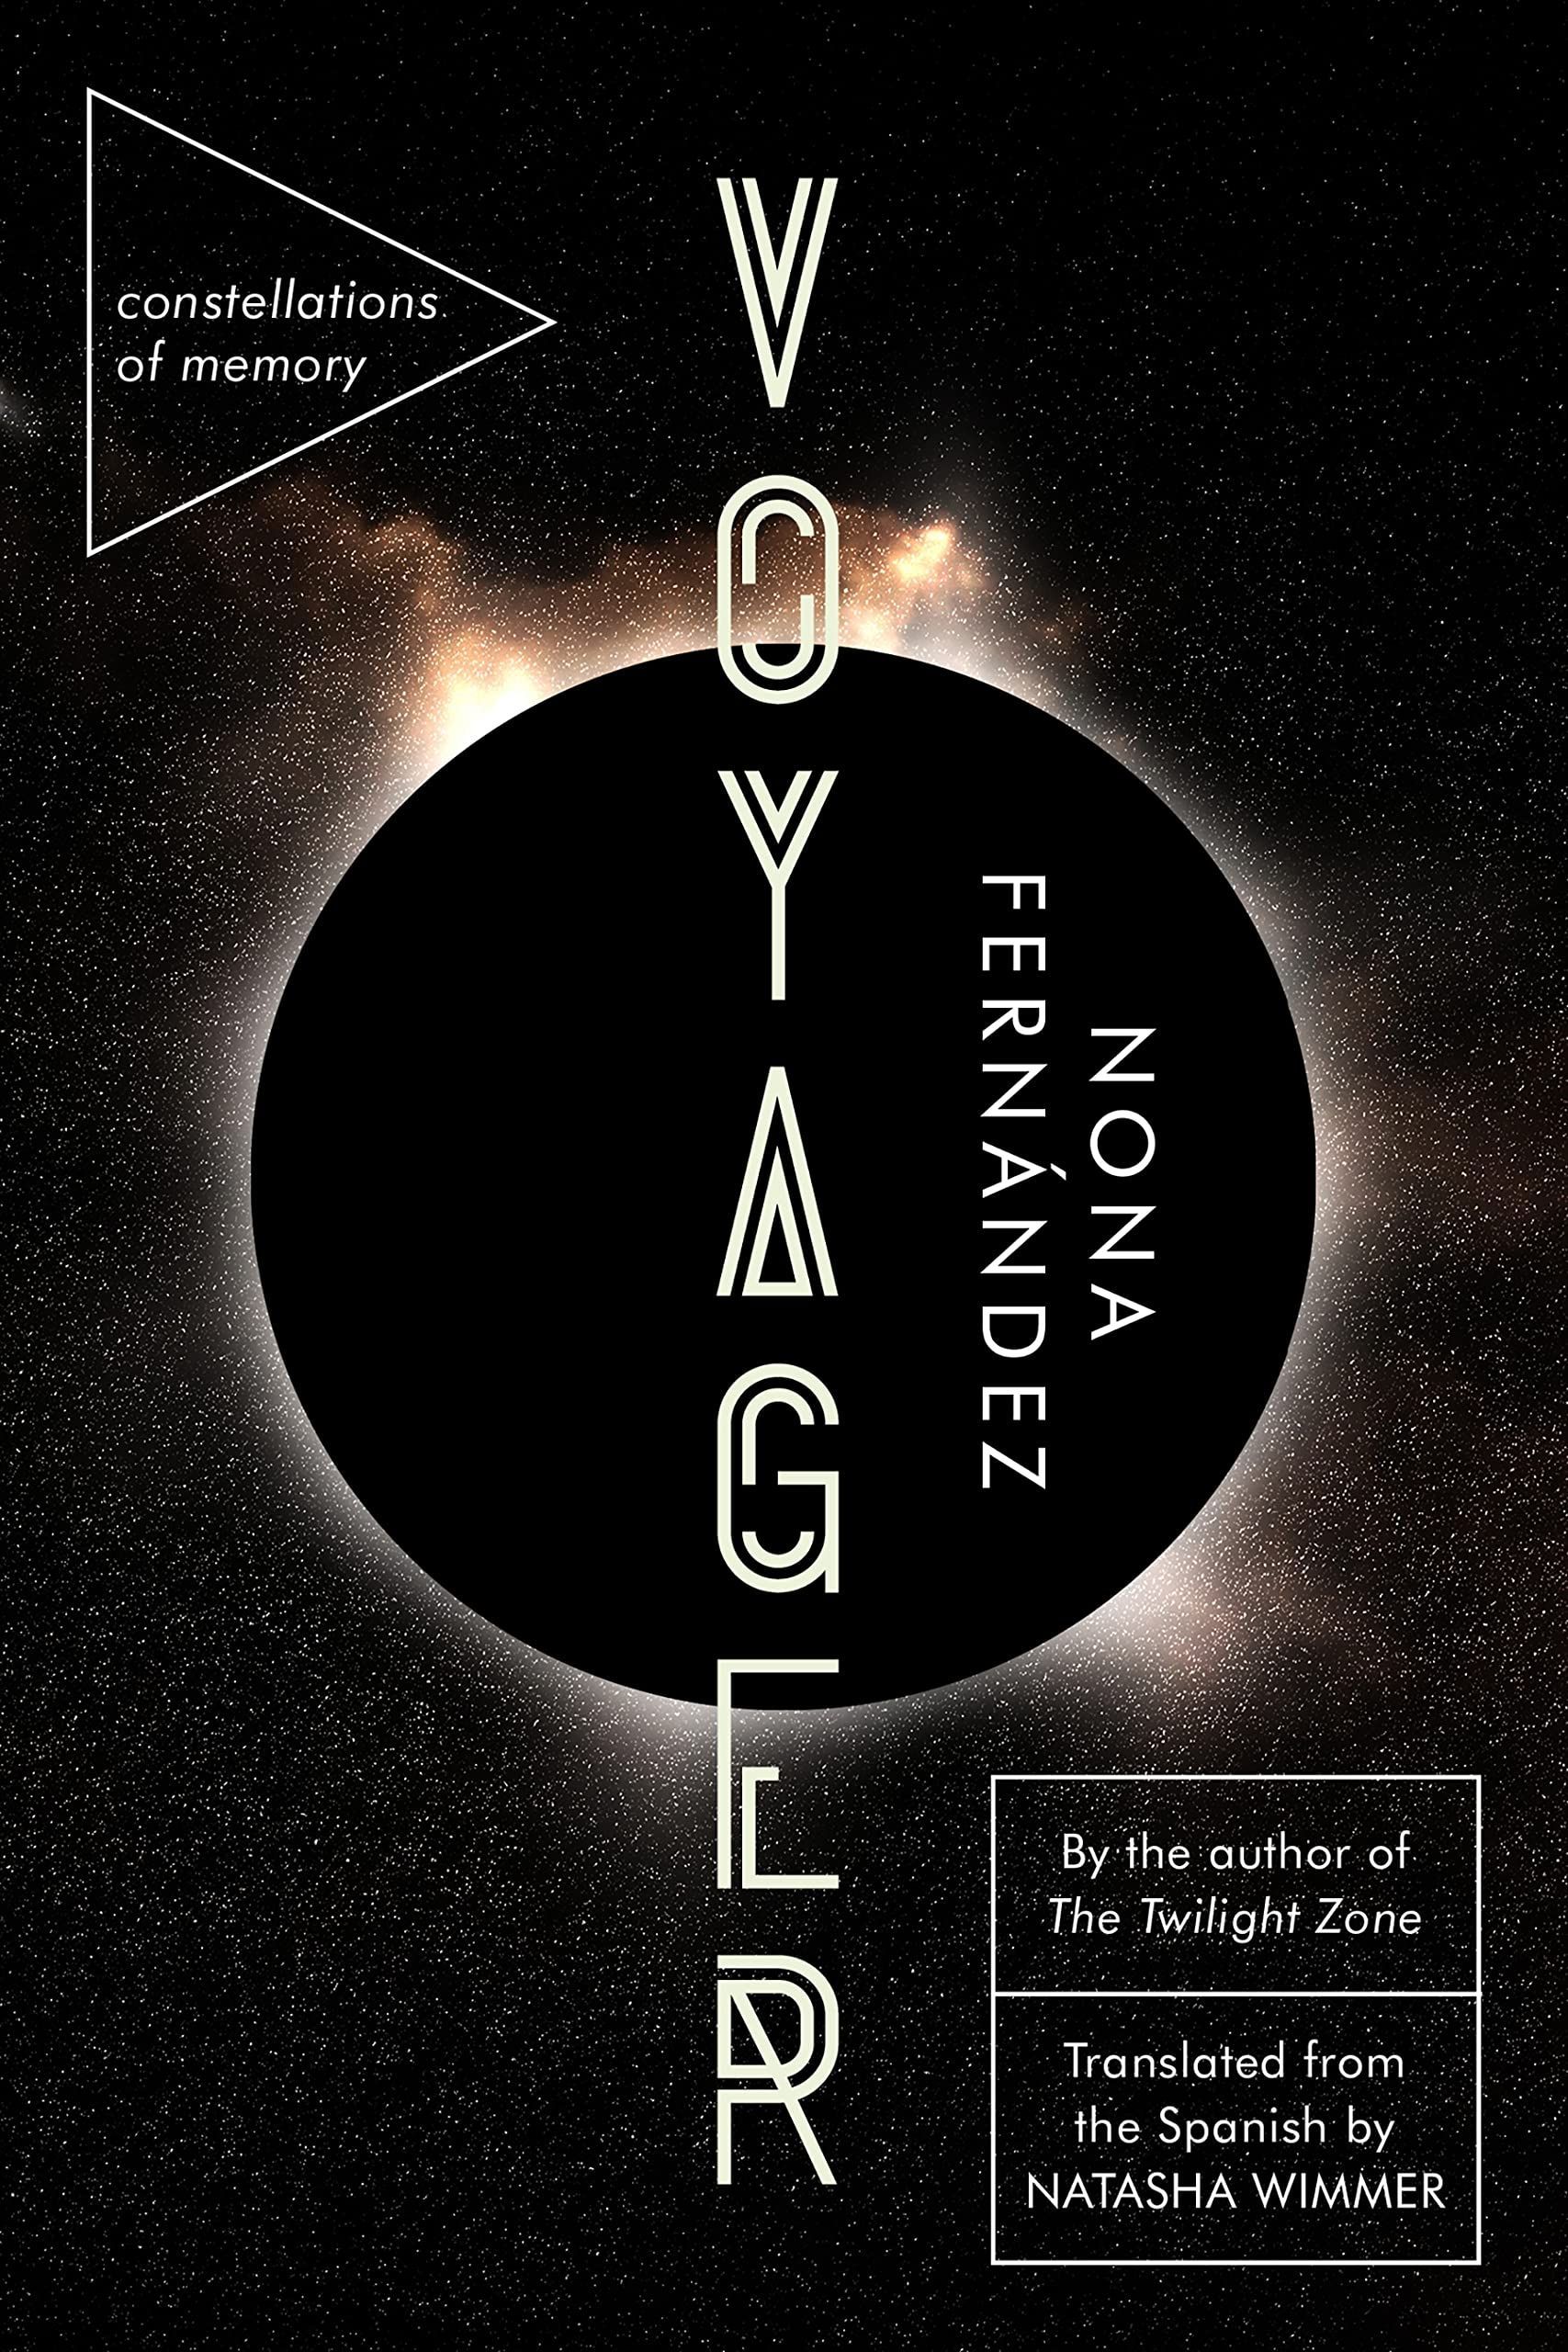 In a Life I Never Had I Was a Brave Cosmonaut: On Nona Fernández’s “Voyager”